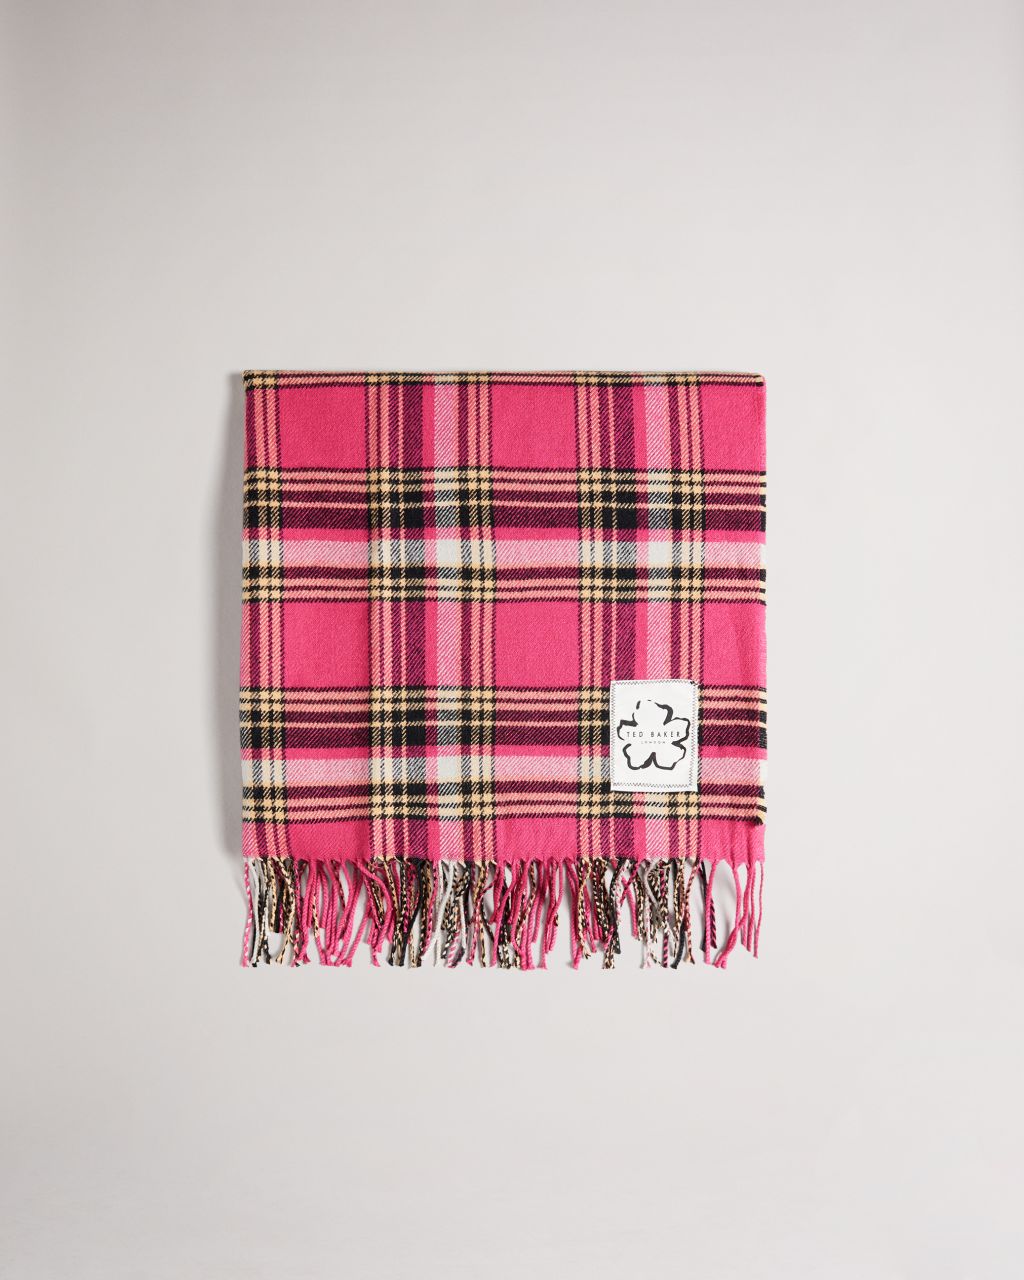 Ted Baker Women's Mini Check Scarf in Bright Pink, Betheni